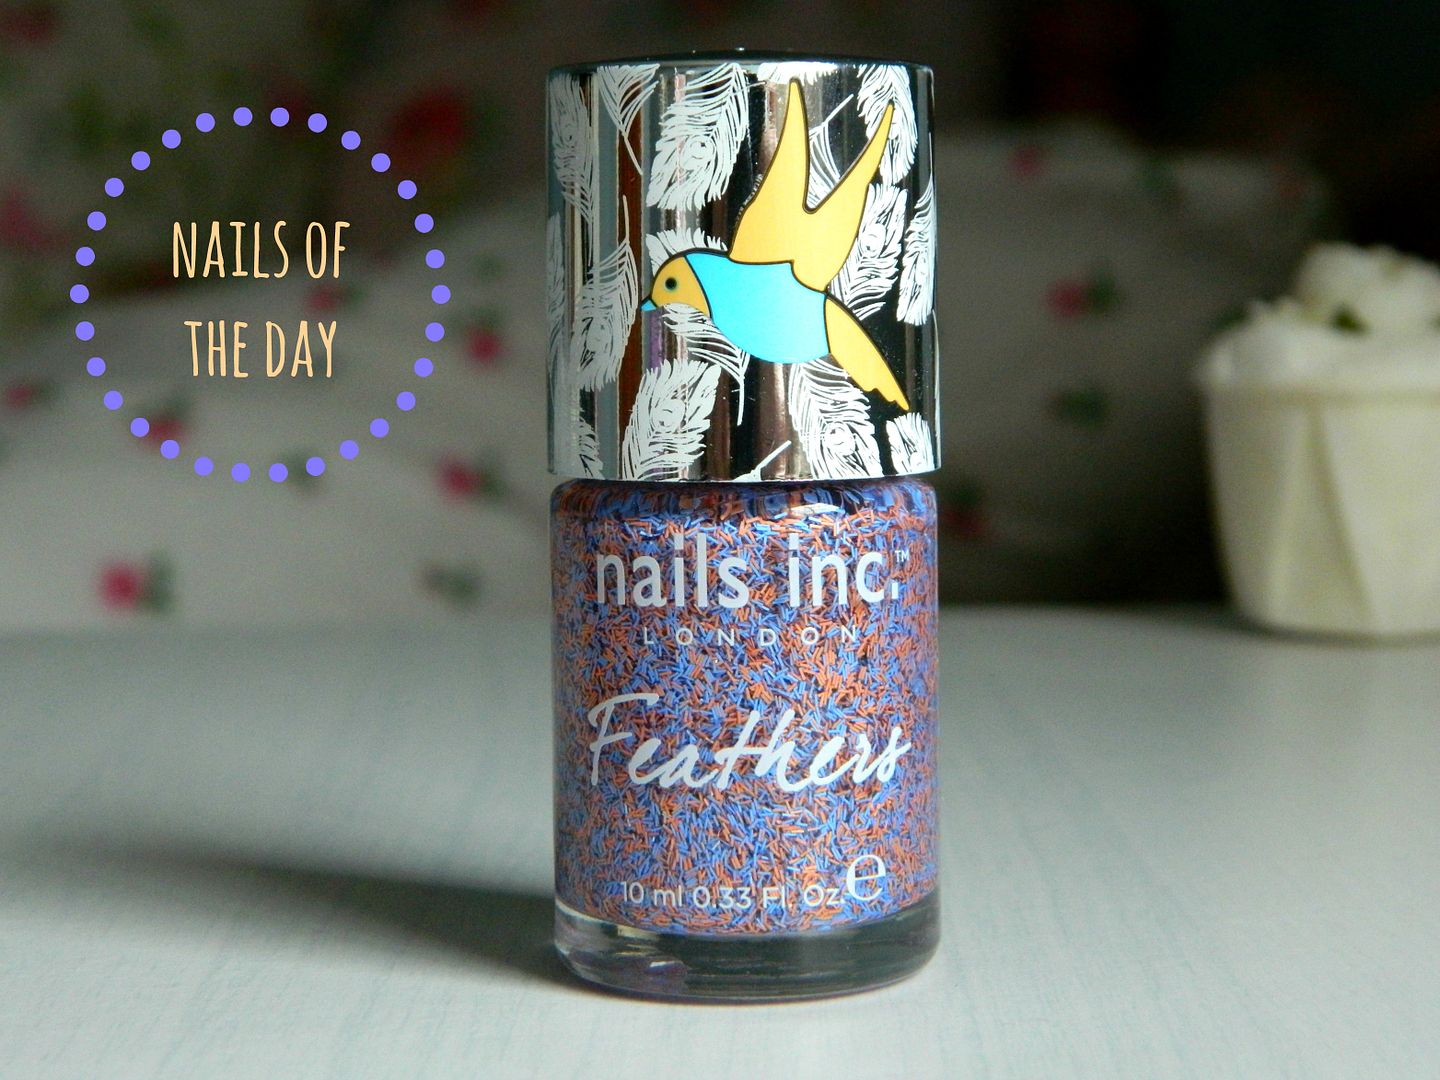 Nails Of the Day Nails Inc Feathers Edinburgh Nail Polish Review Belle-amie